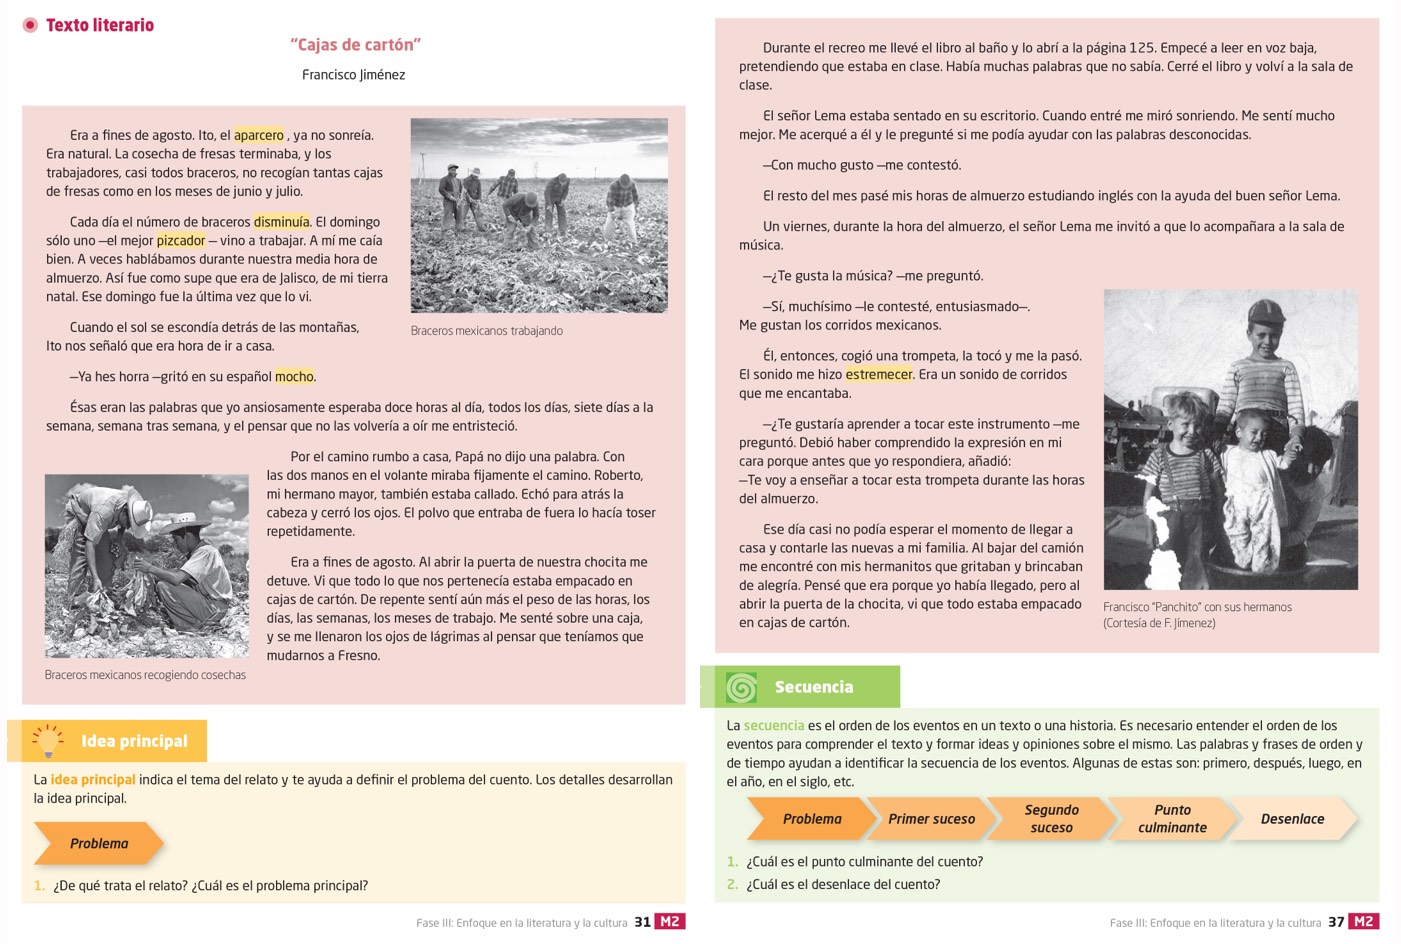 Textbook pages showing a story with highlighted vocabulary and reading strategies.